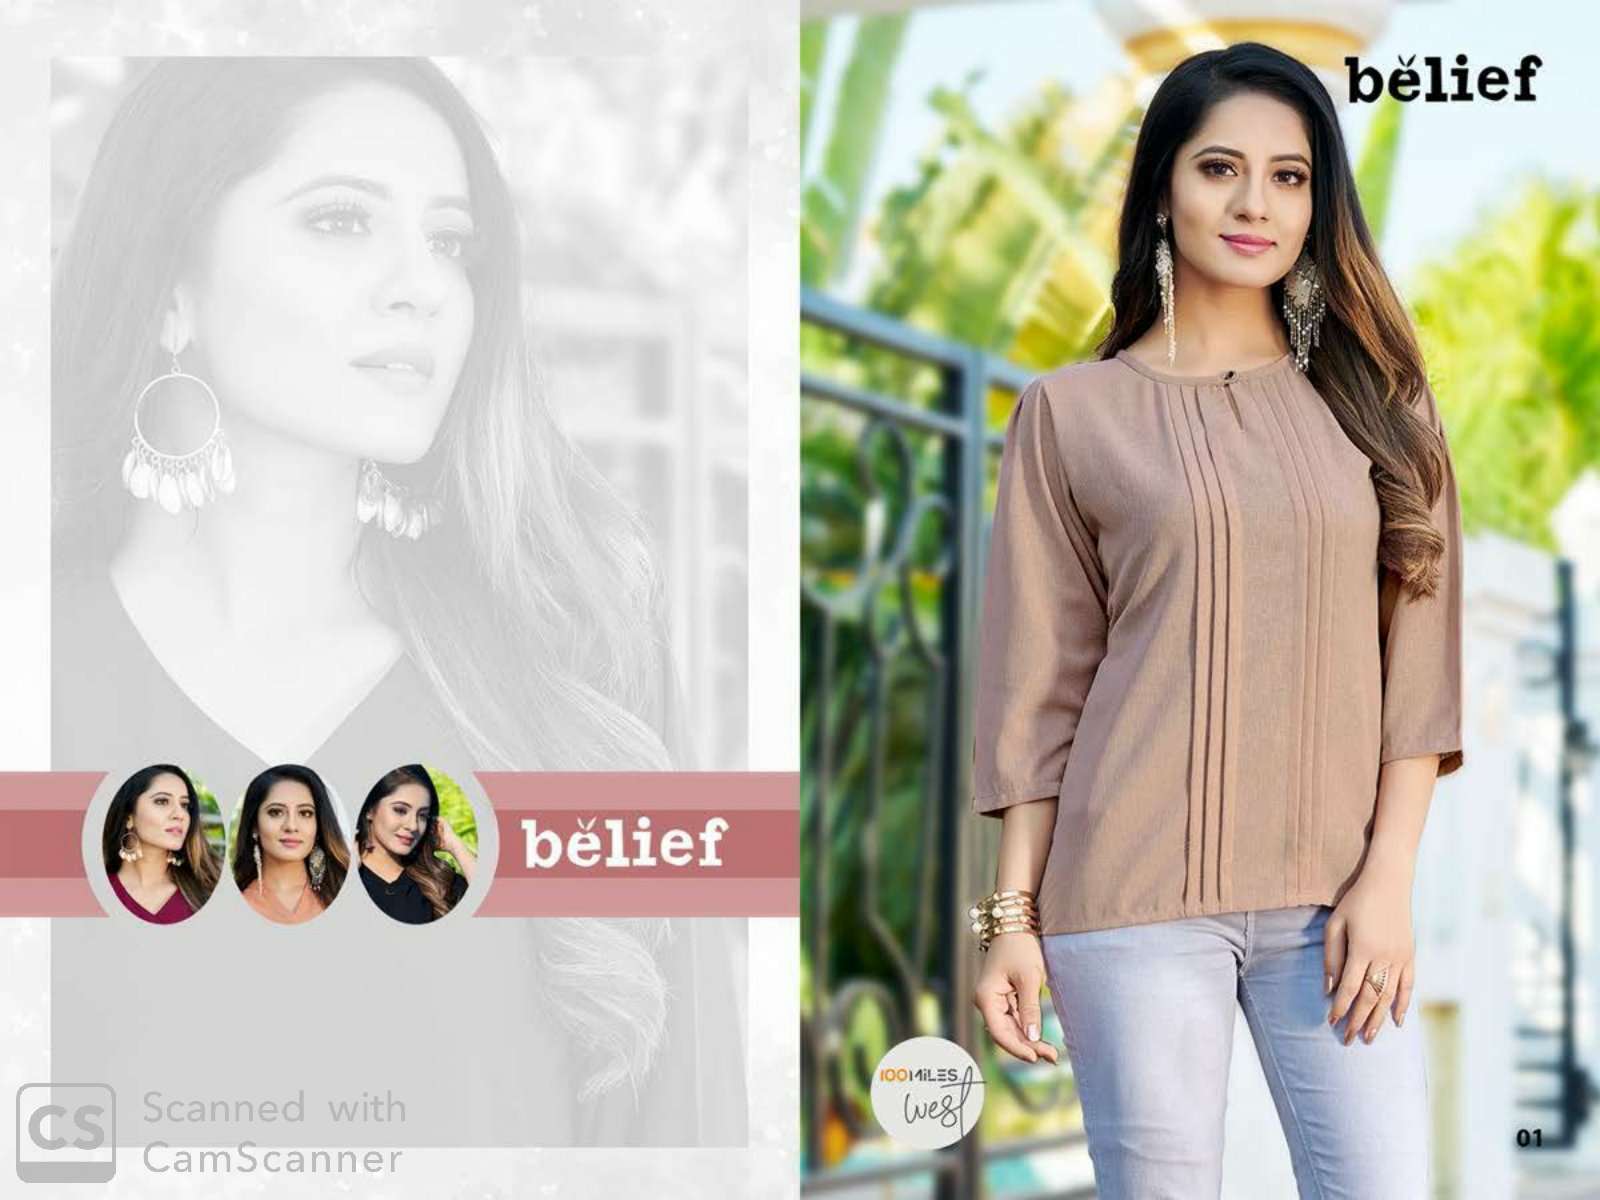 100 miles belief classy catchy look solid Western designer Tops in blended fabrics